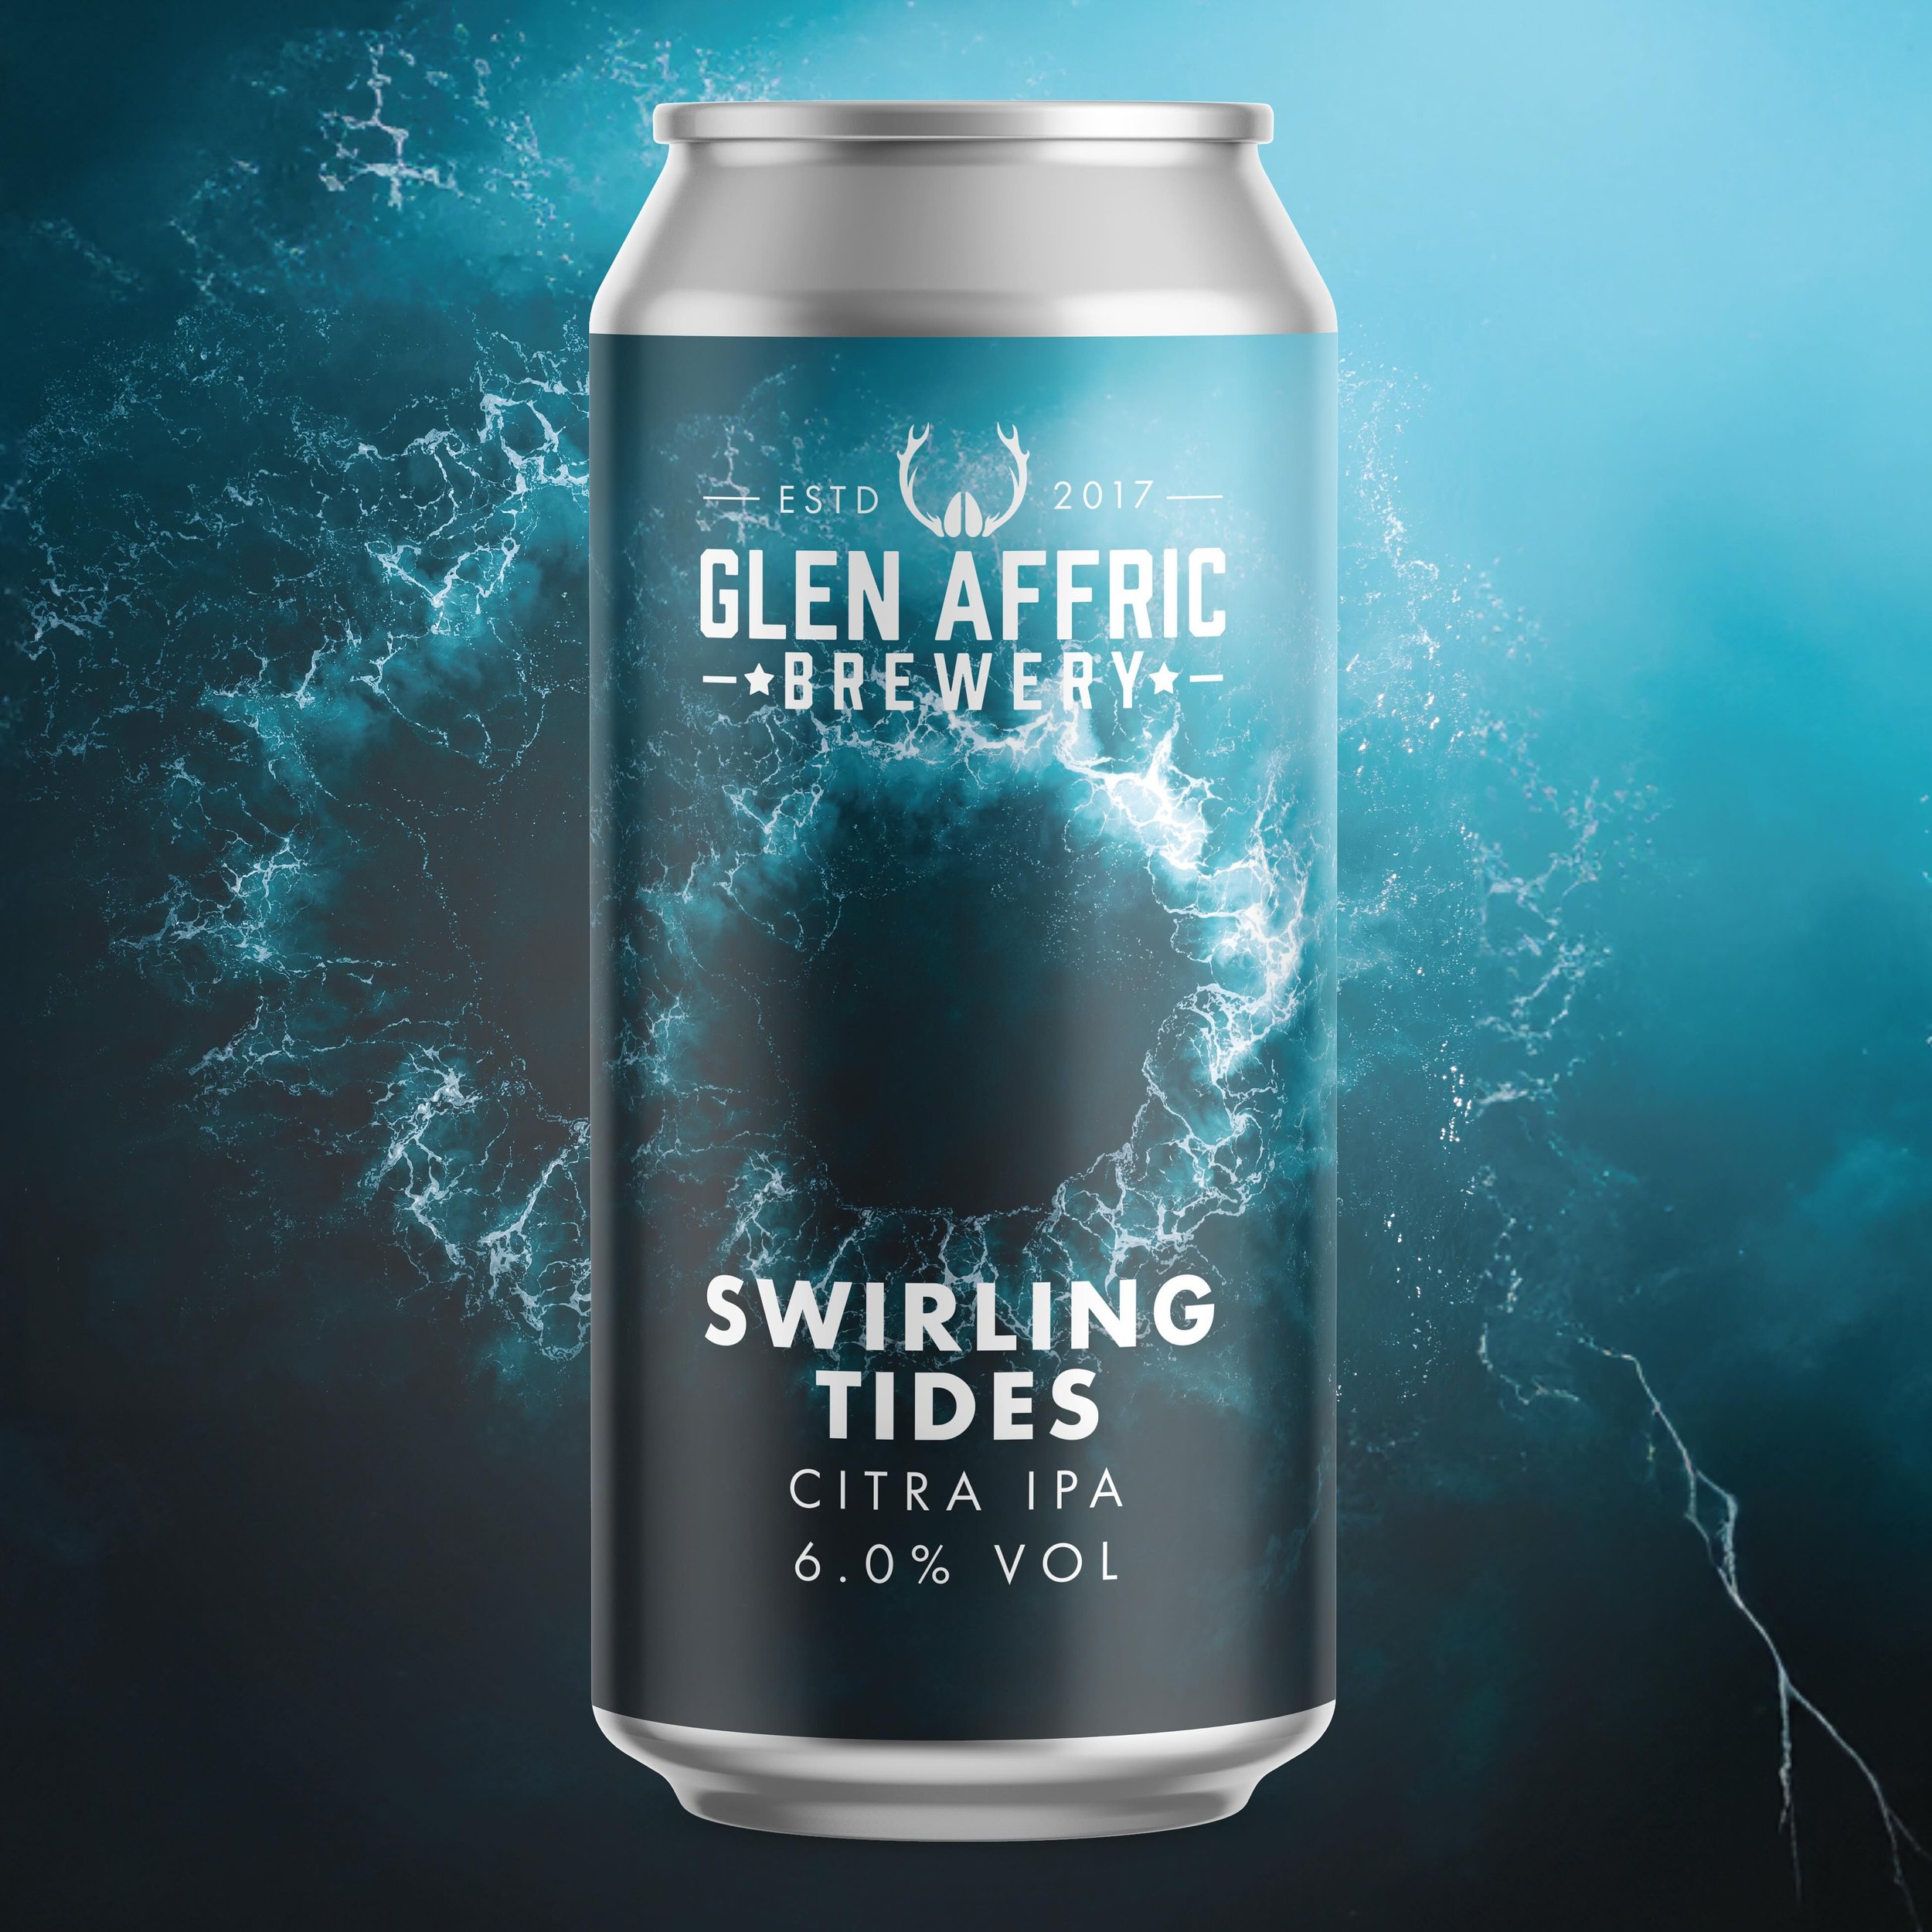 🌊SWIRLING TIDES // 6% CITRA IPA

Try not to get lost at sea and get swept up by the rising tides of this juicy Citra IPA!

Flowing with its soft, velvety mouthfeel the enchanting notes of Calypso, and the citrus burst of Amarillo hops, this silky so